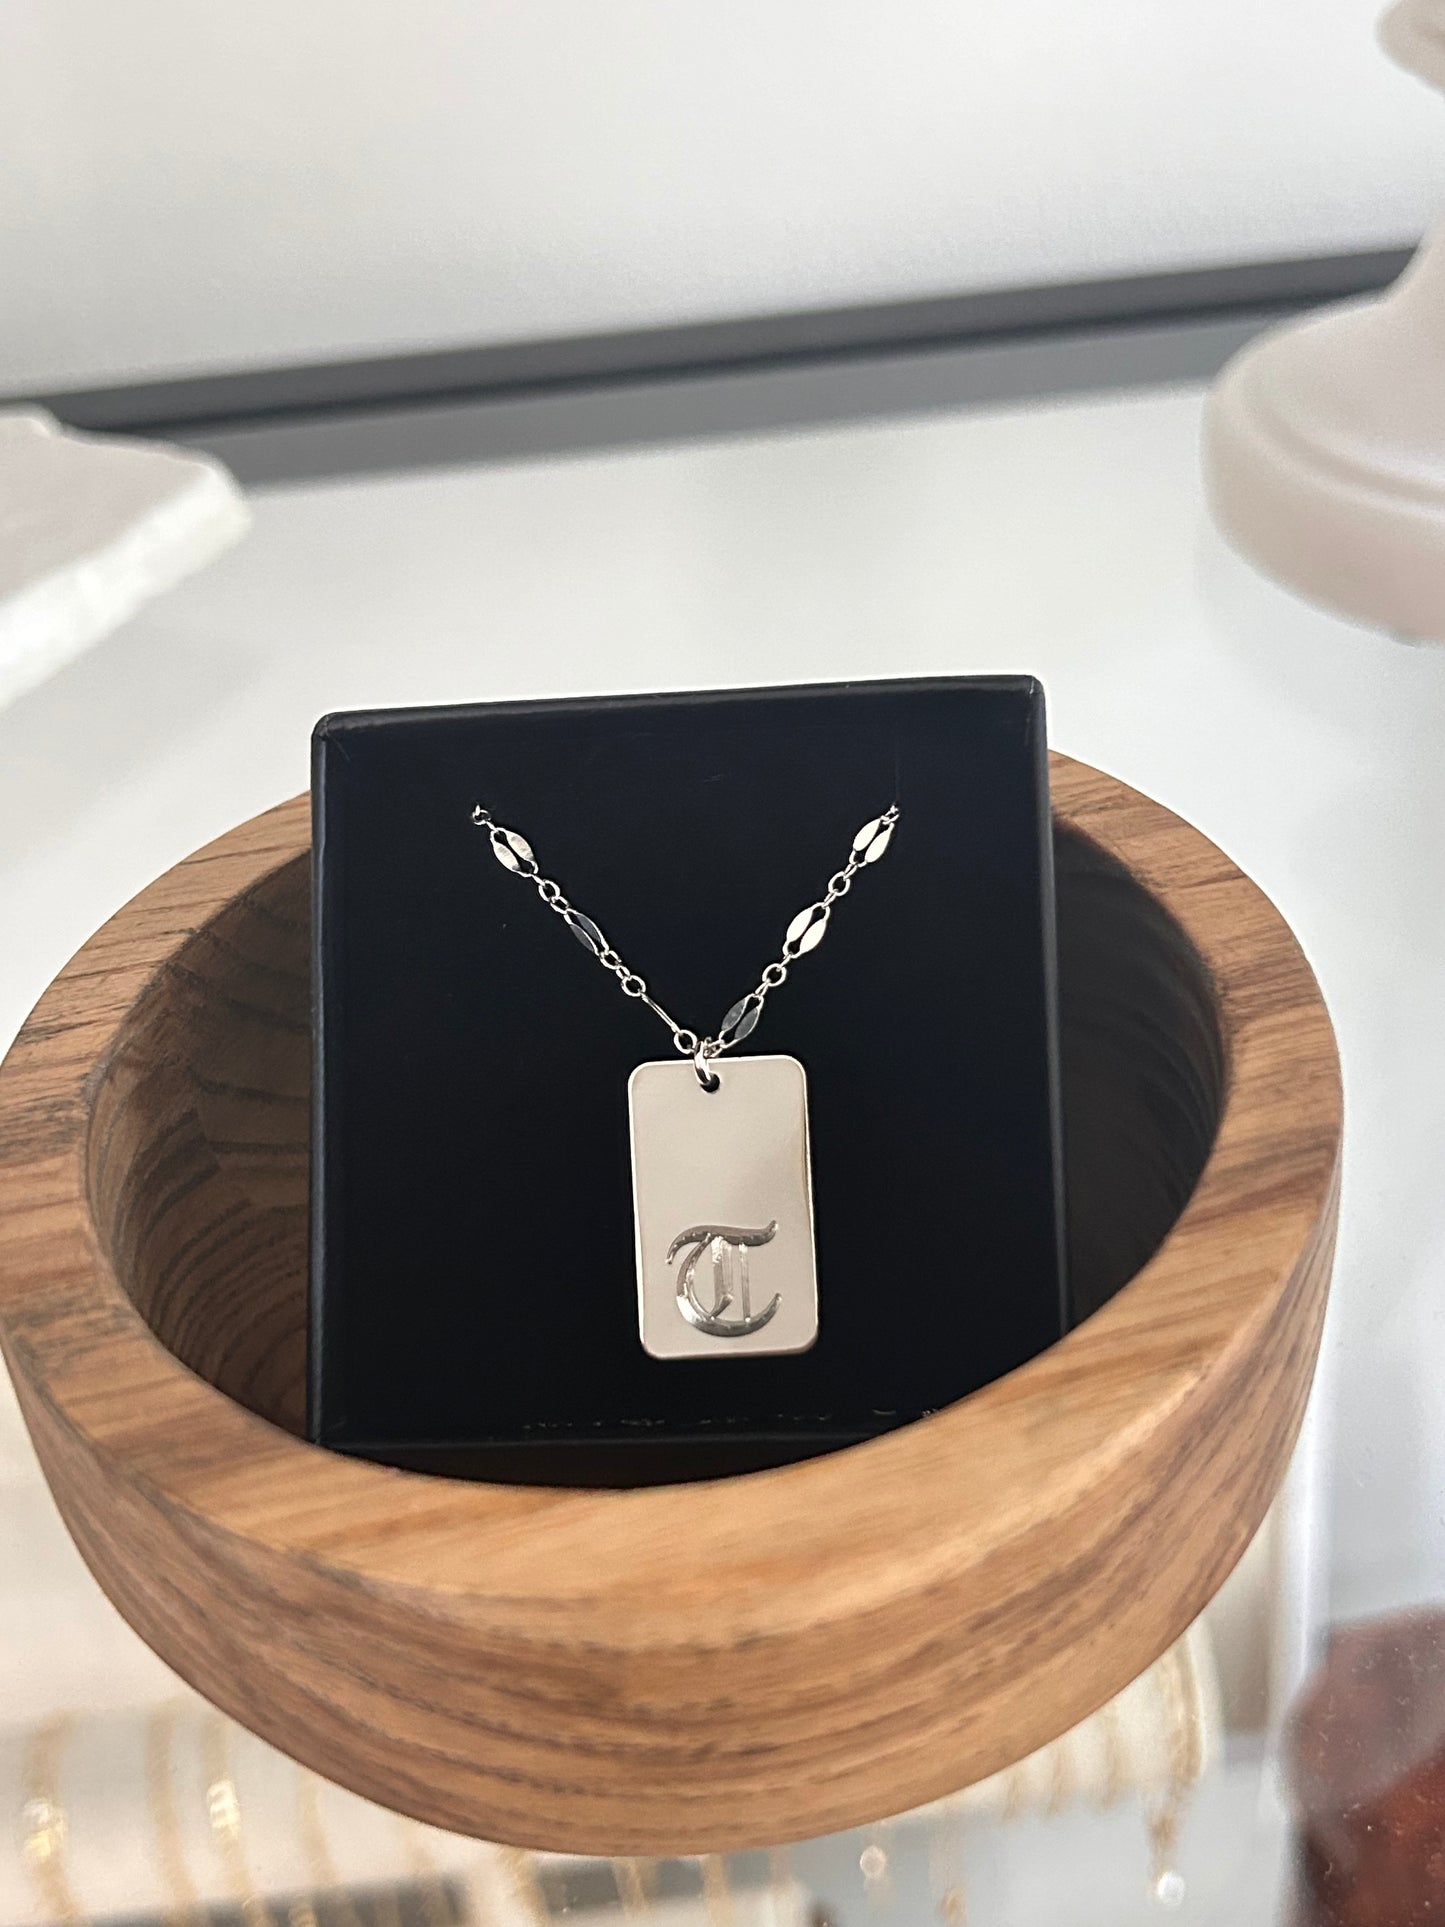 Engraved Old English Initial Dog Tag Necklace